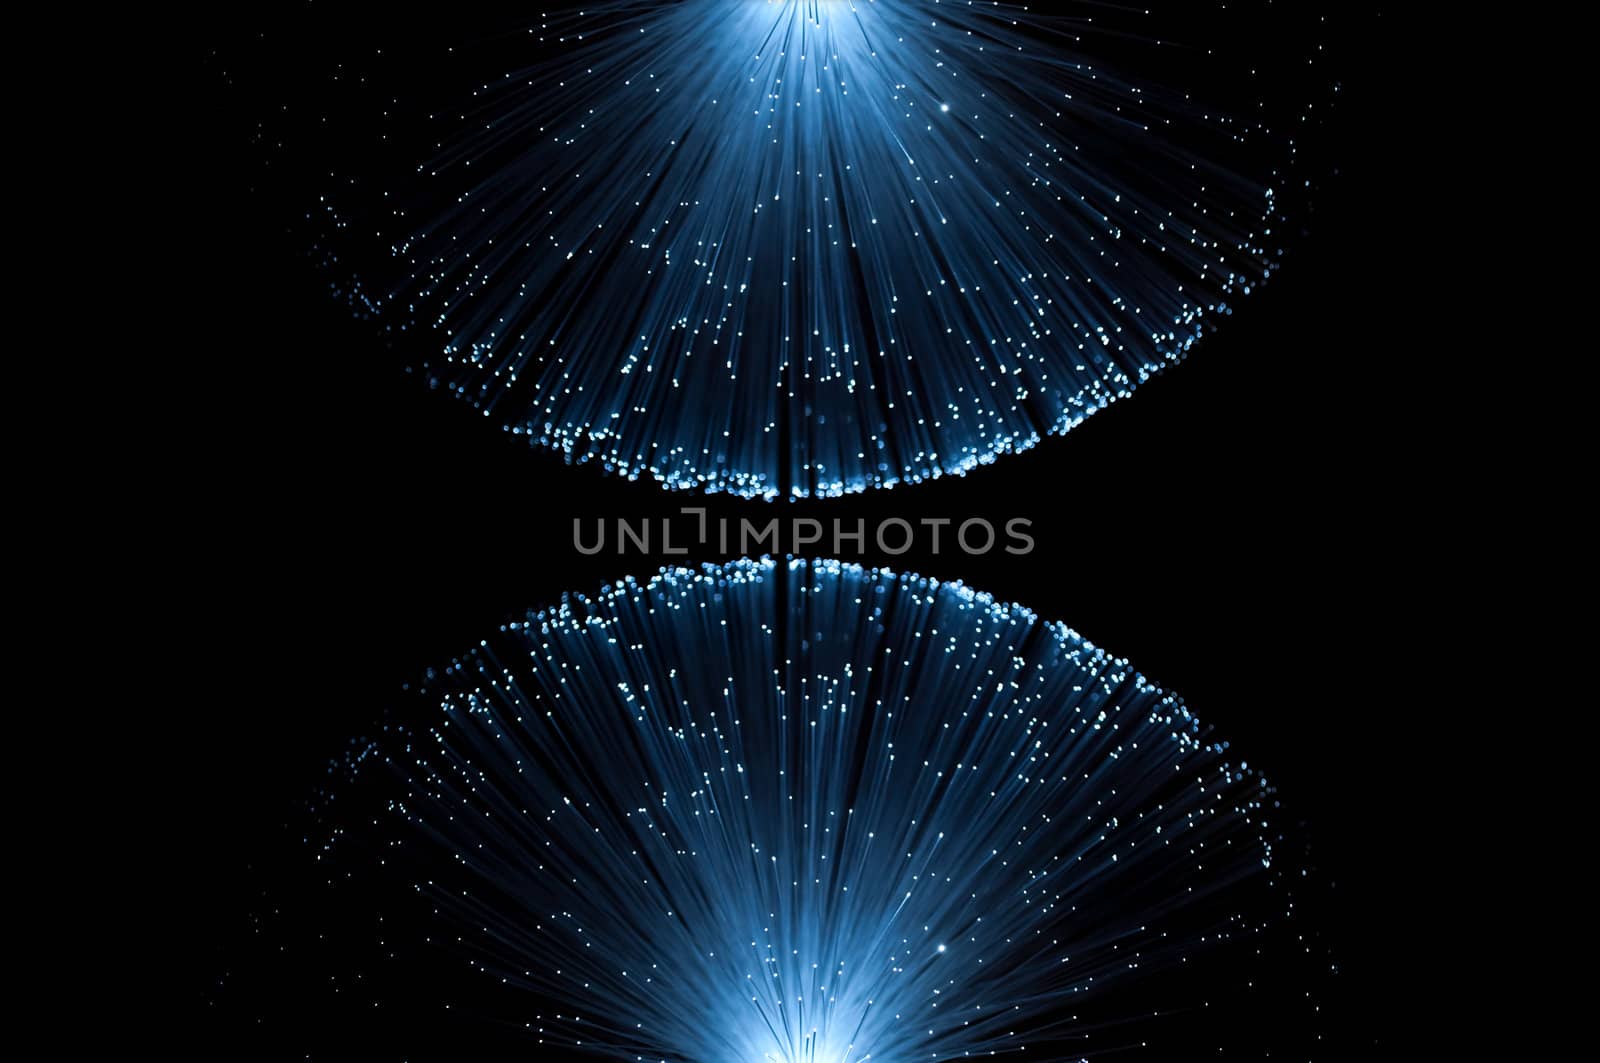 Two groups of illuminated blue fibre optic light strands eminating from the top and bottom border of the image against a black background.